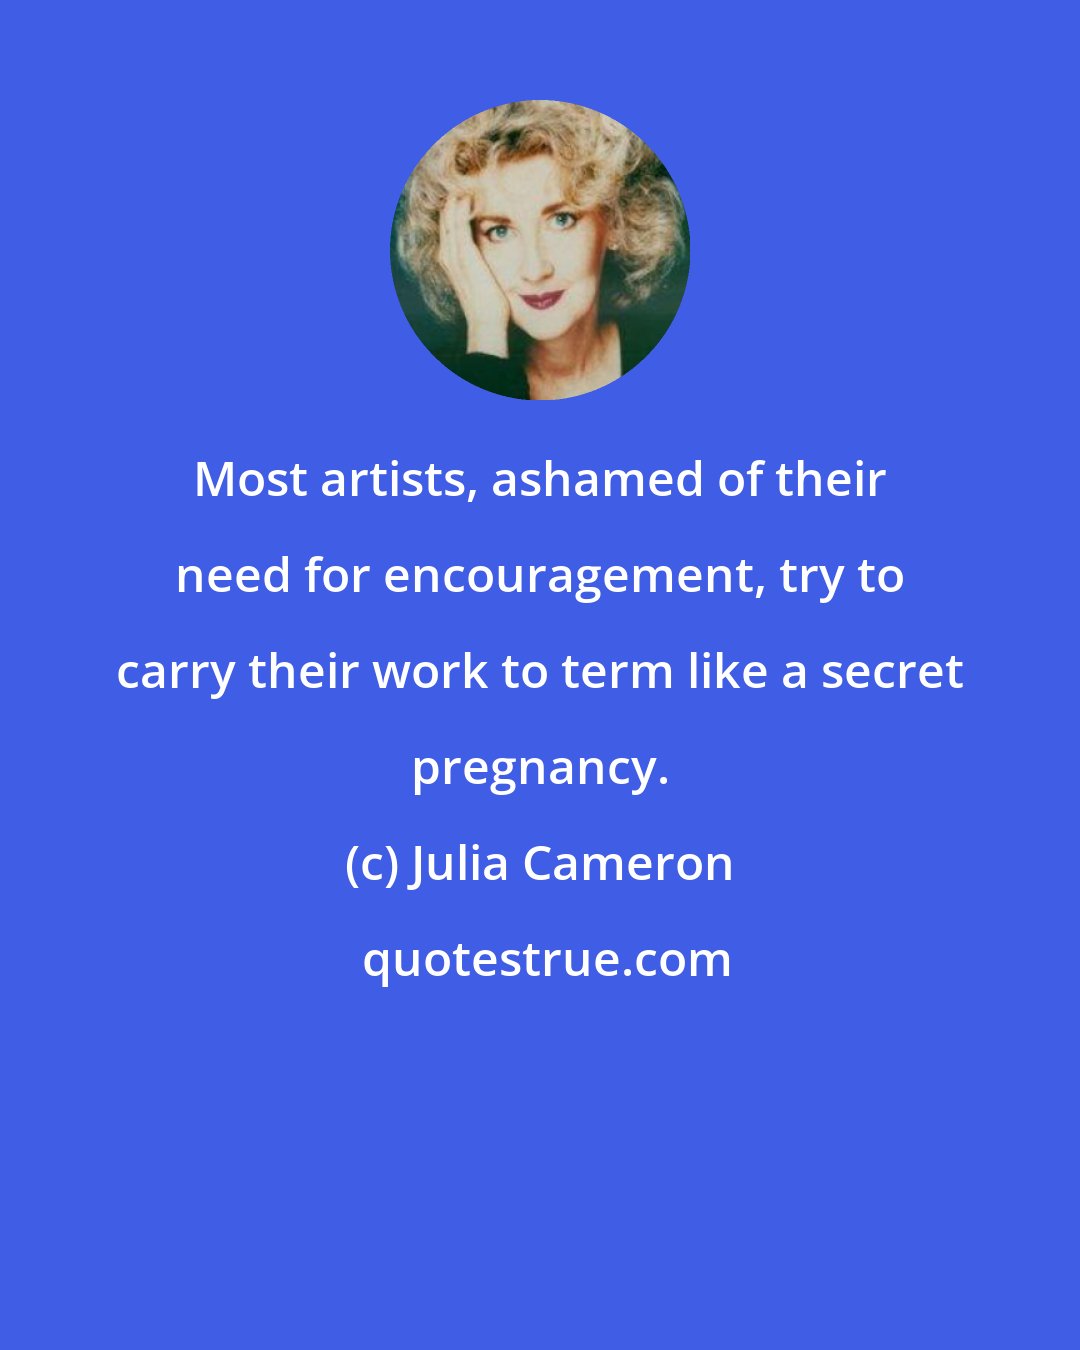 Julia Cameron: Most artists, ashamed of their need for encouragement, try to carry their work to term like a secret pregnancy.